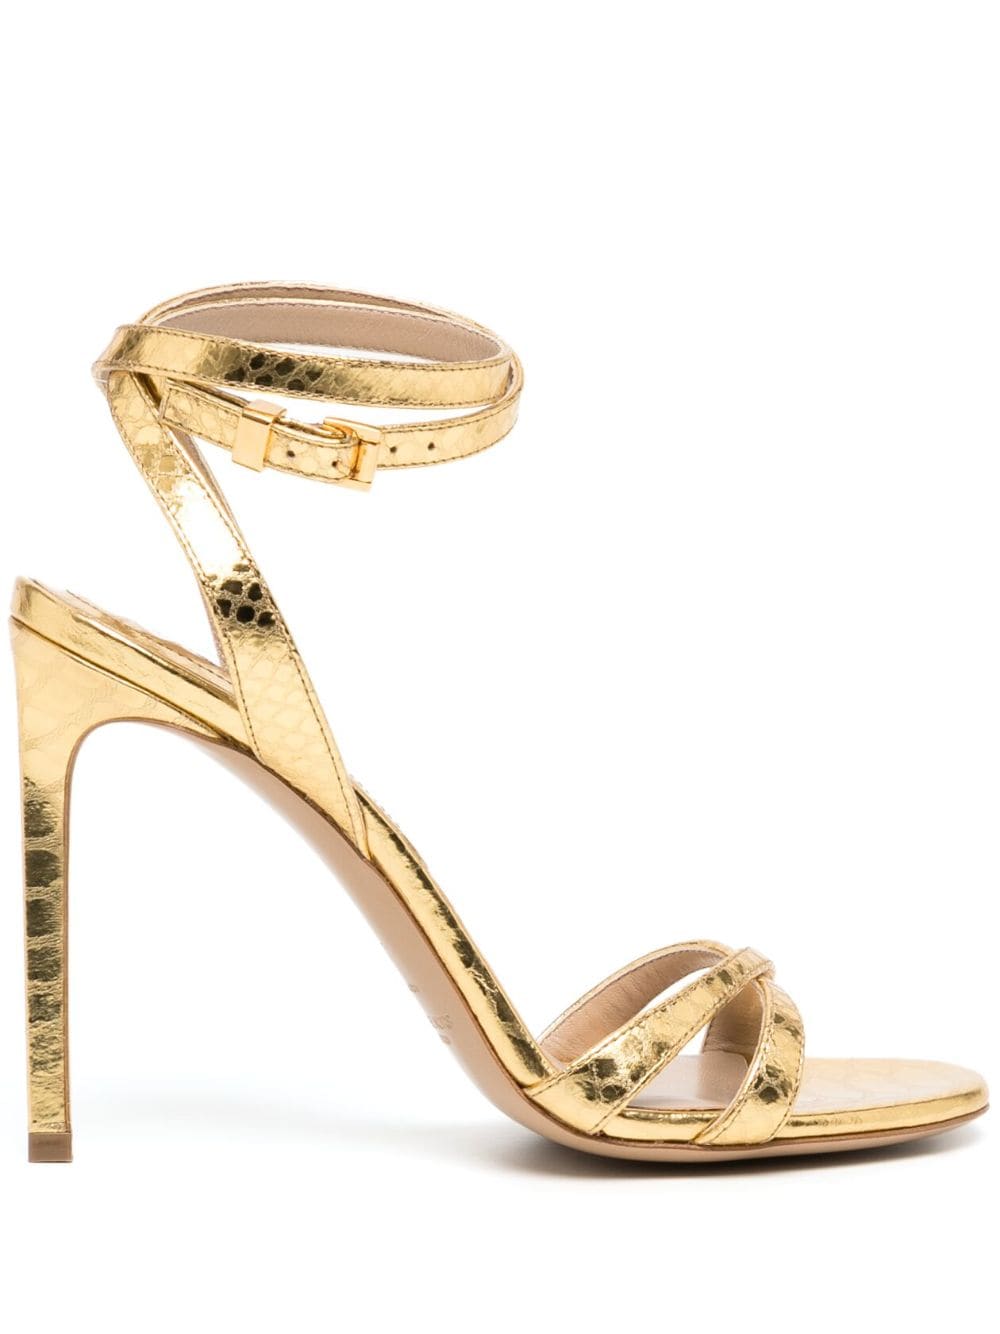 Michael Kors Collection Chrissy 110mm leather sandals - Gold von Michael Kors Collection